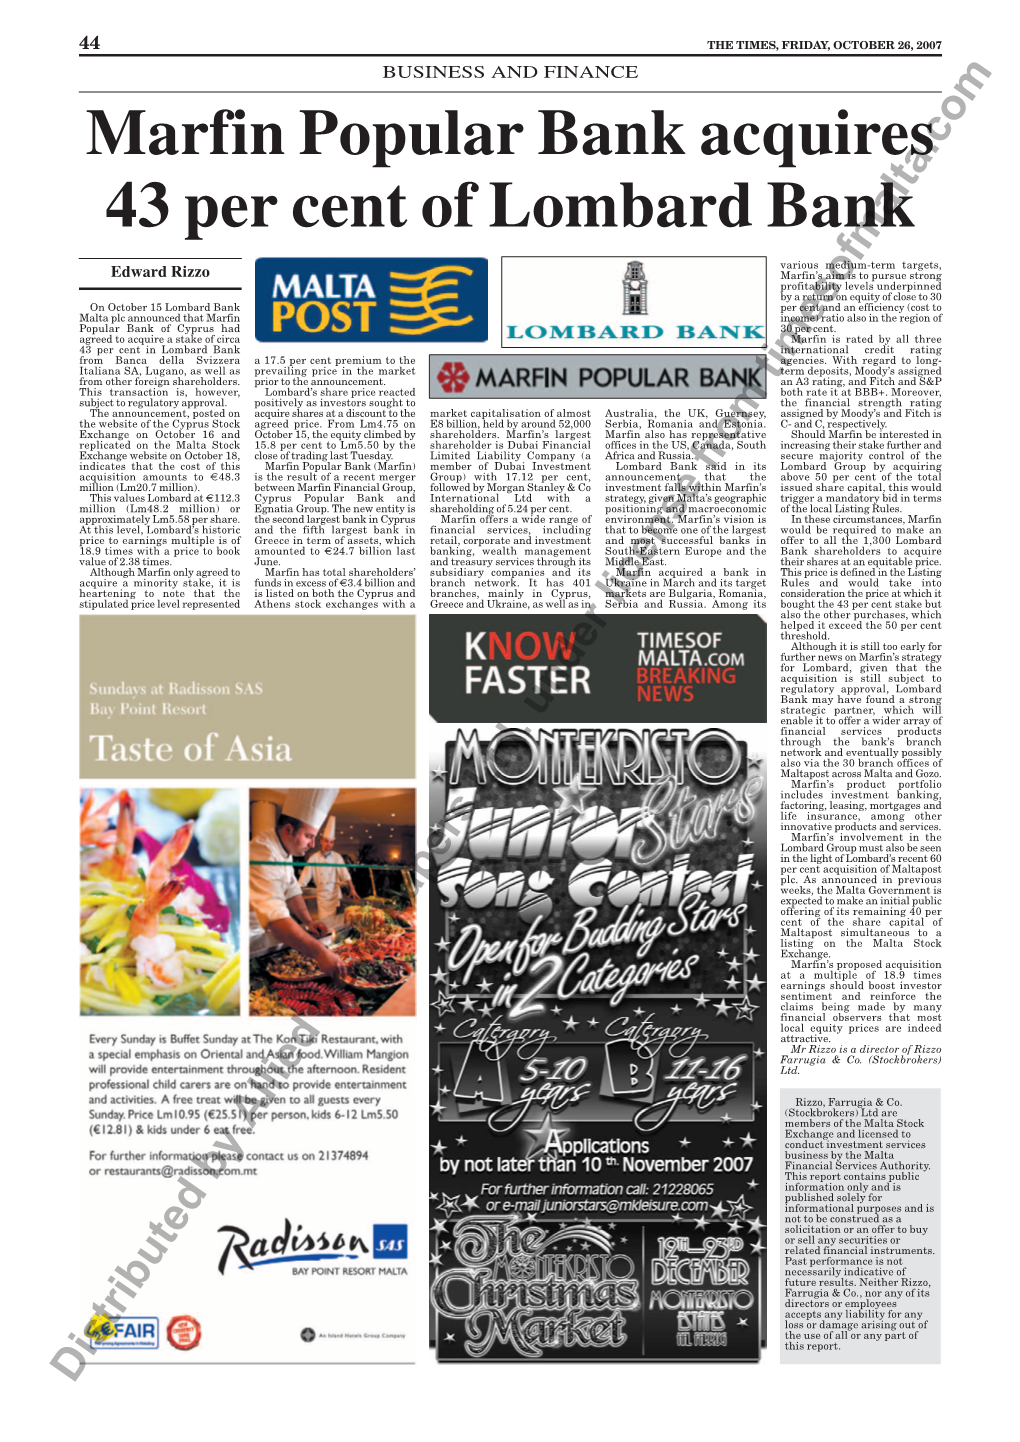 Marfin Popular Bank Acquires 43 Per Cent of Lombard Bank